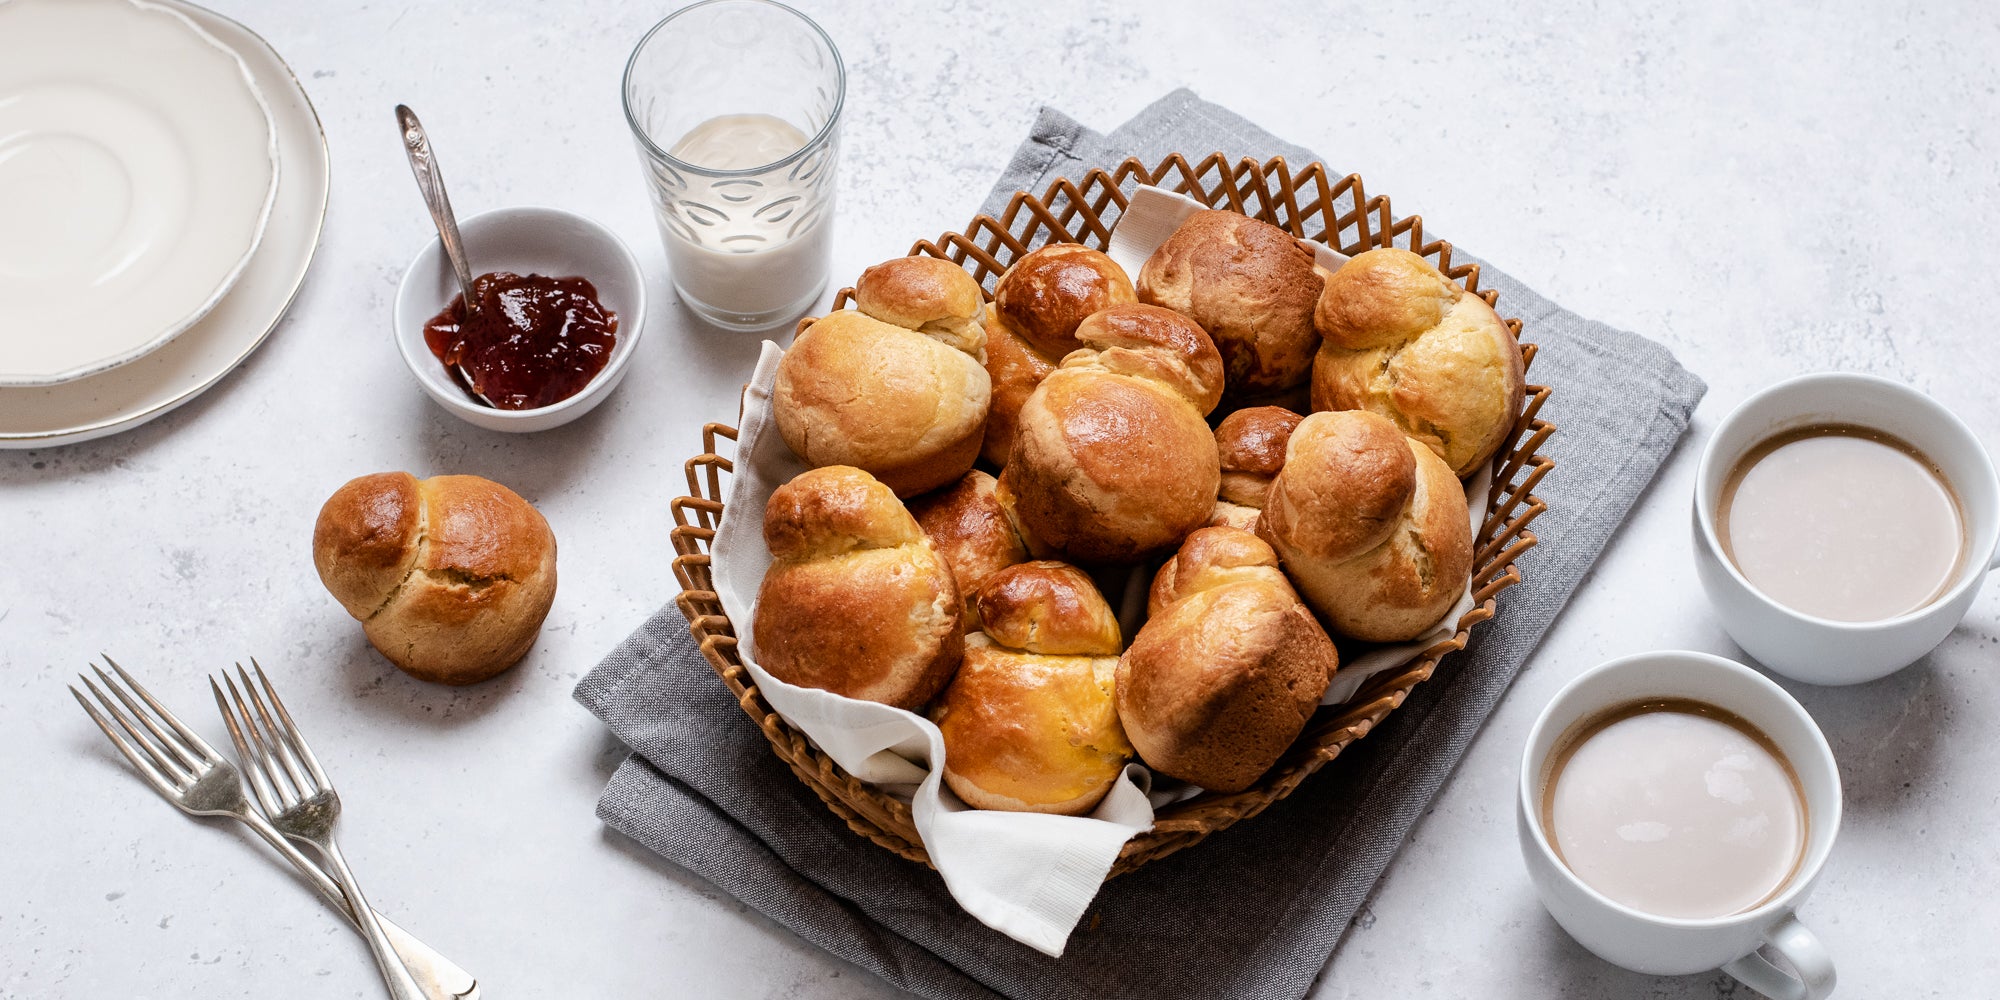 A batch of golden Brioche in a wicker basket, next to cups of tea, a bowl of jam and a glass of milk